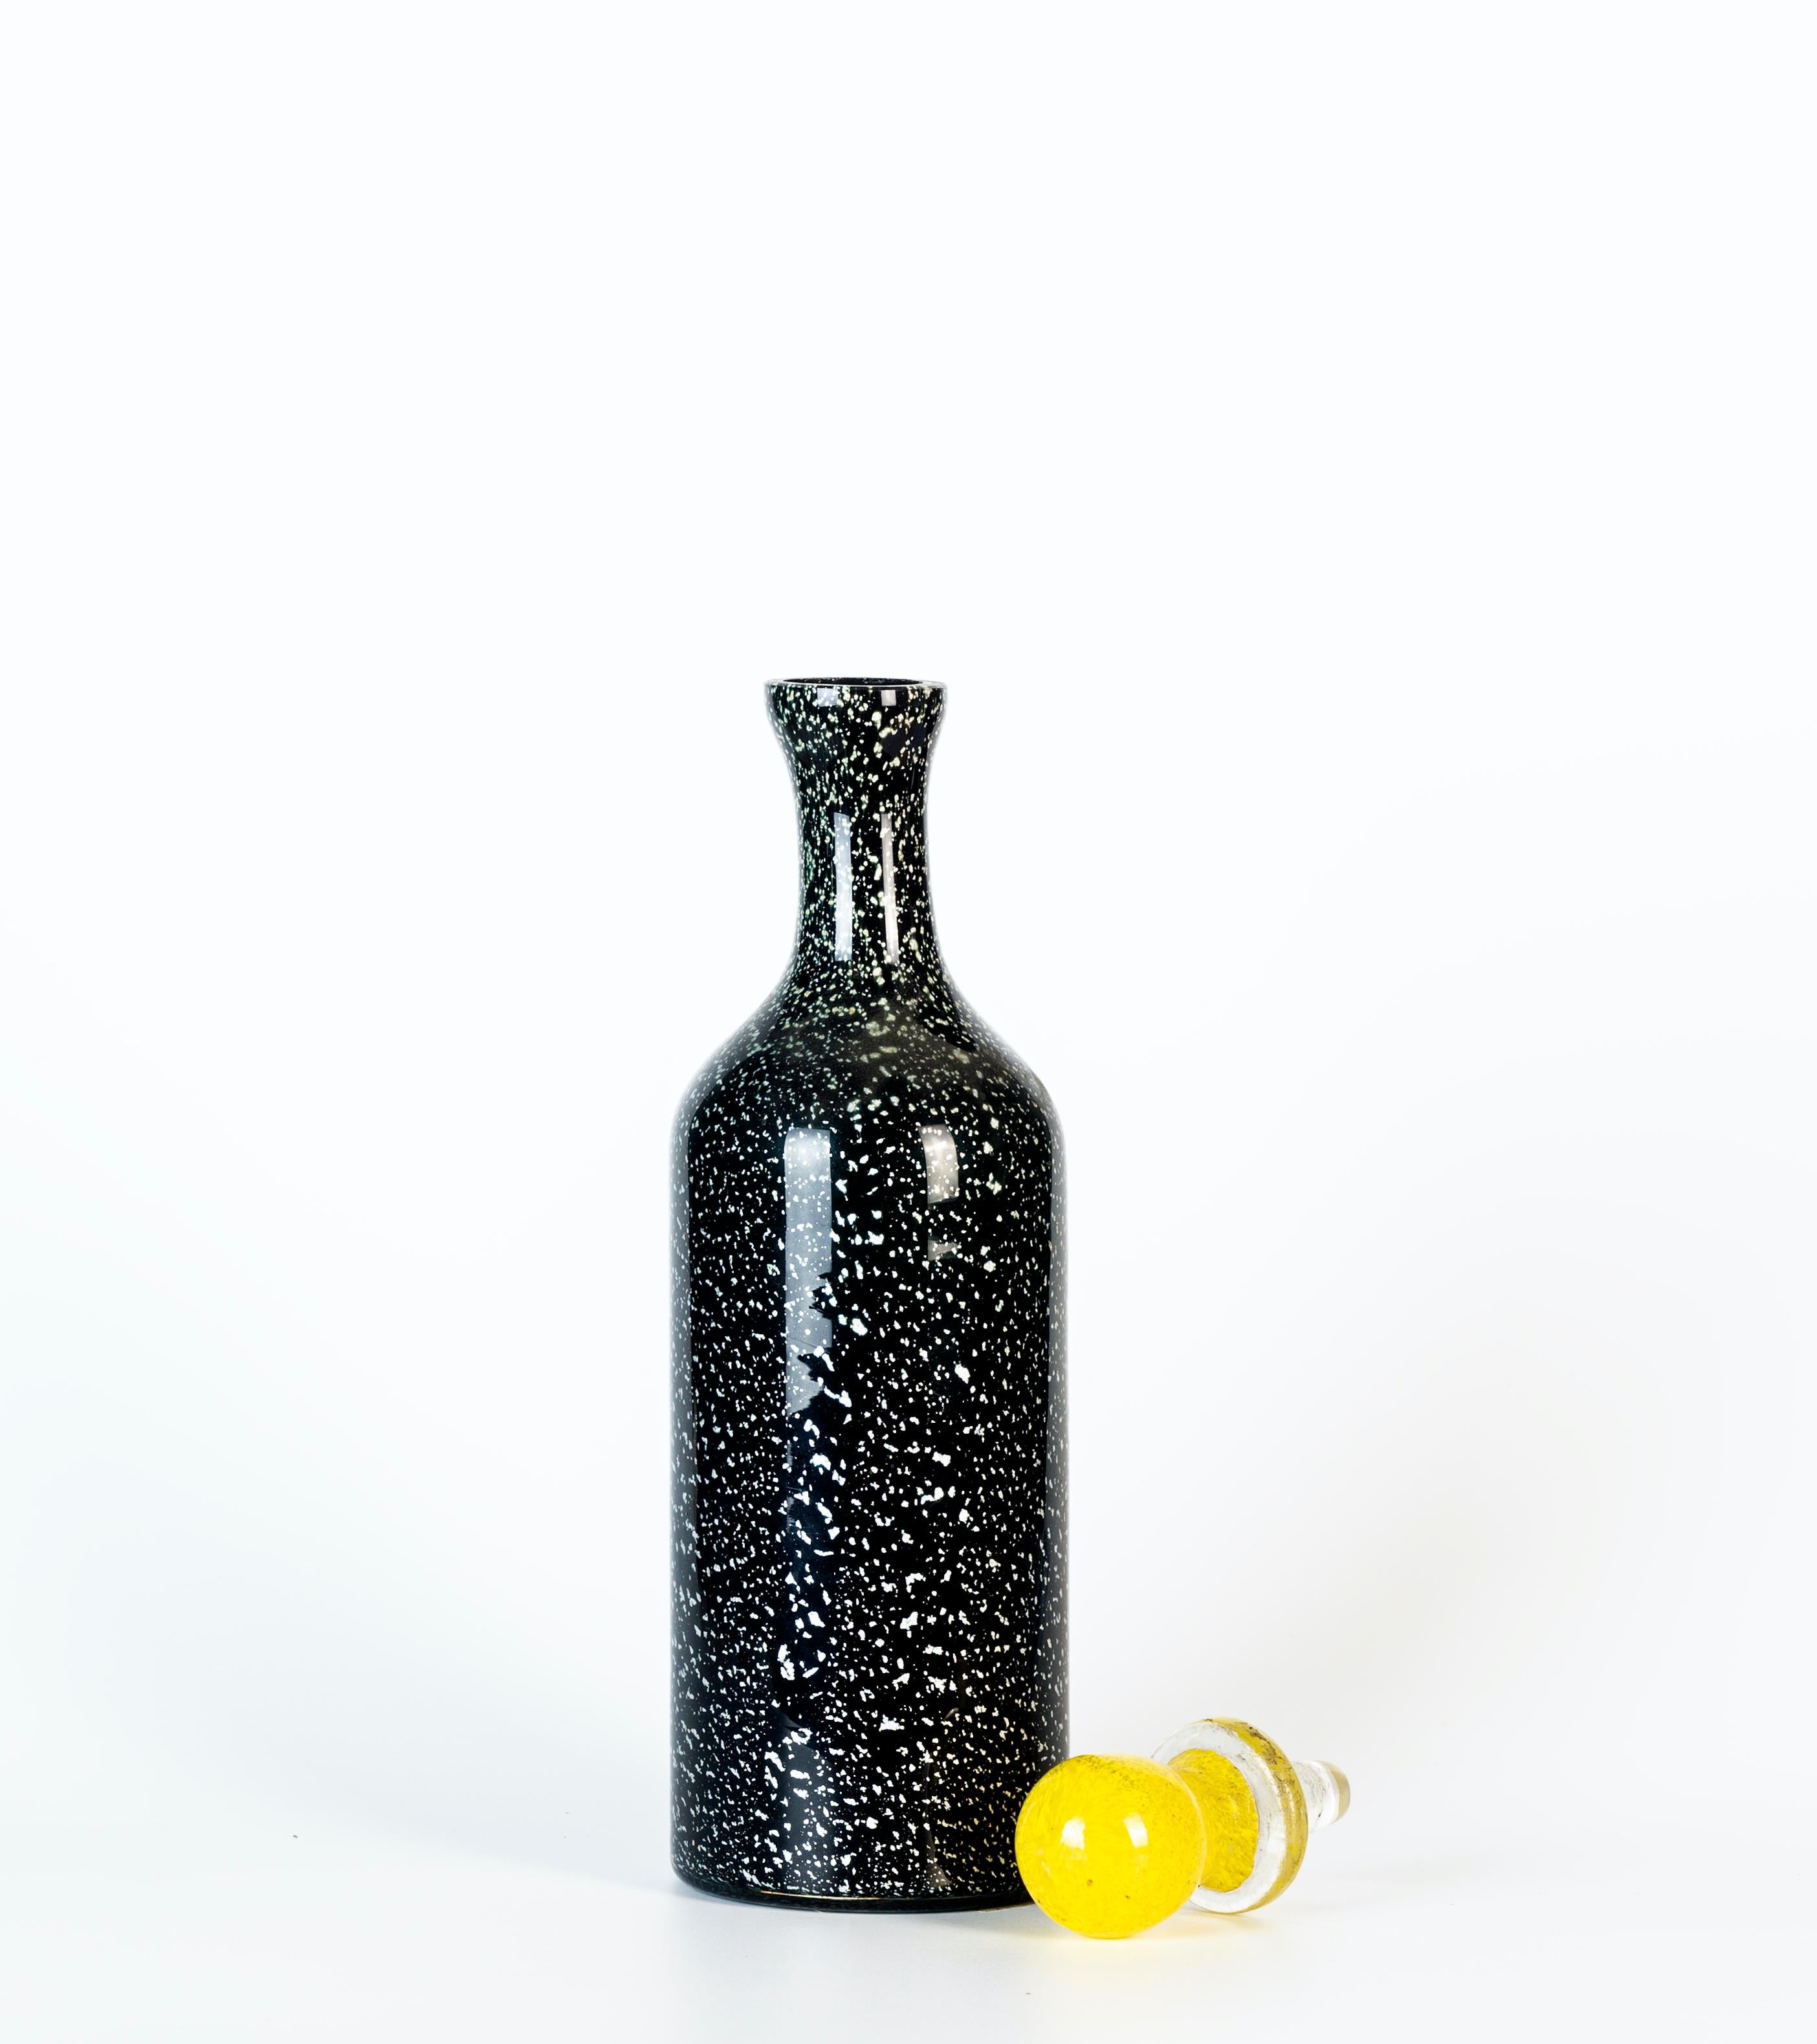 Italian Vintage Black and White Spotted Bottle by Jean Mell Murano, Italy, 1970s